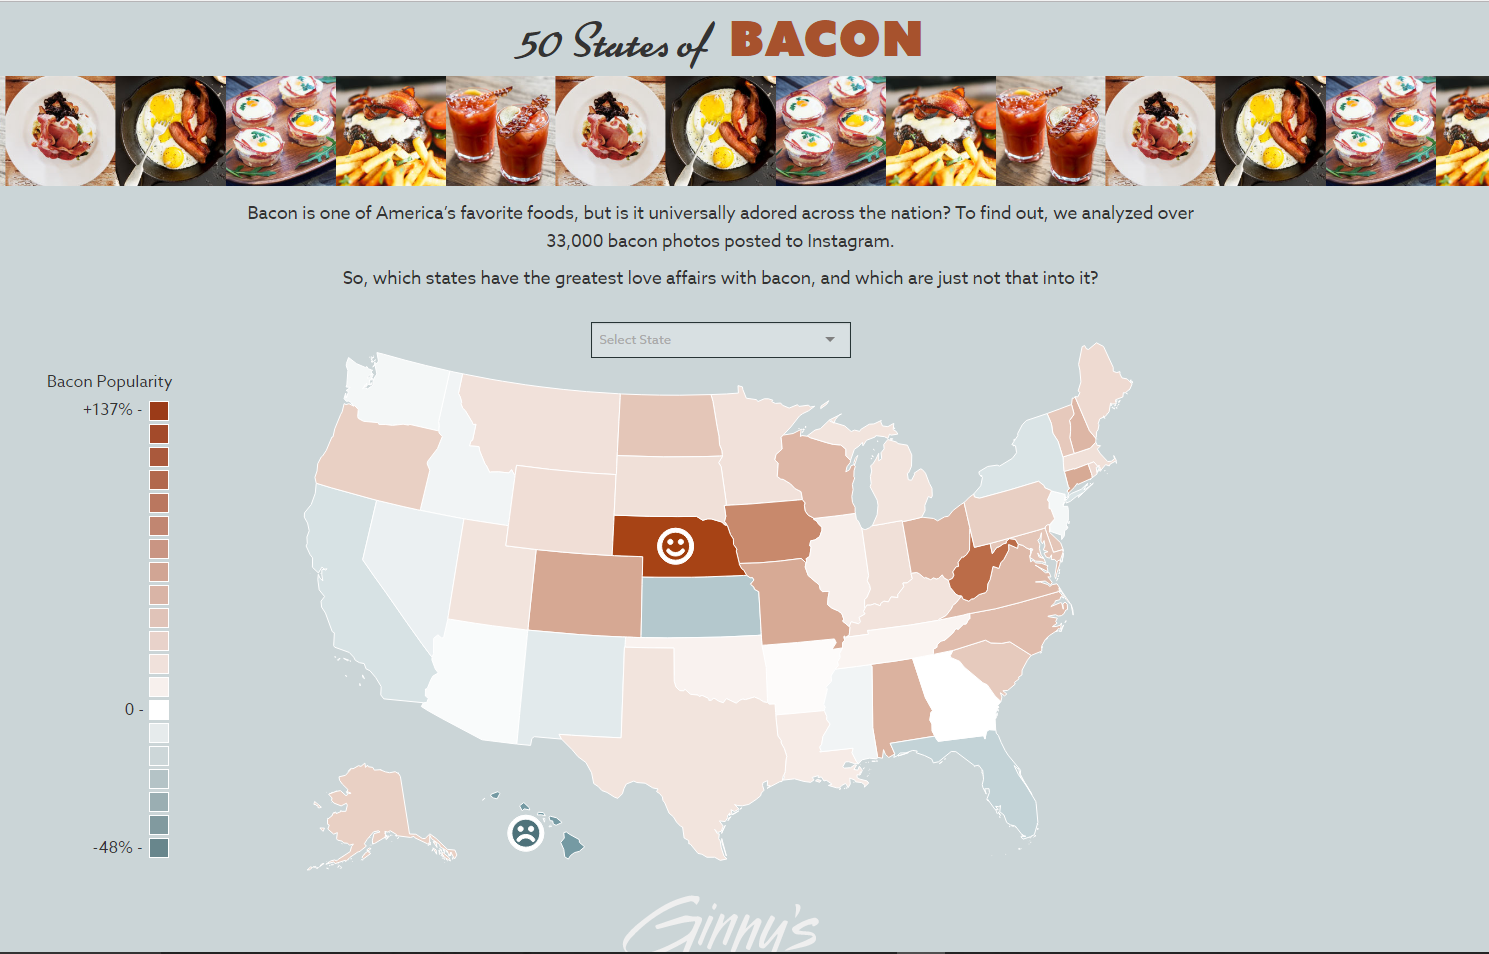 Ginny's Marketing Campaign - 50 States of Bacon